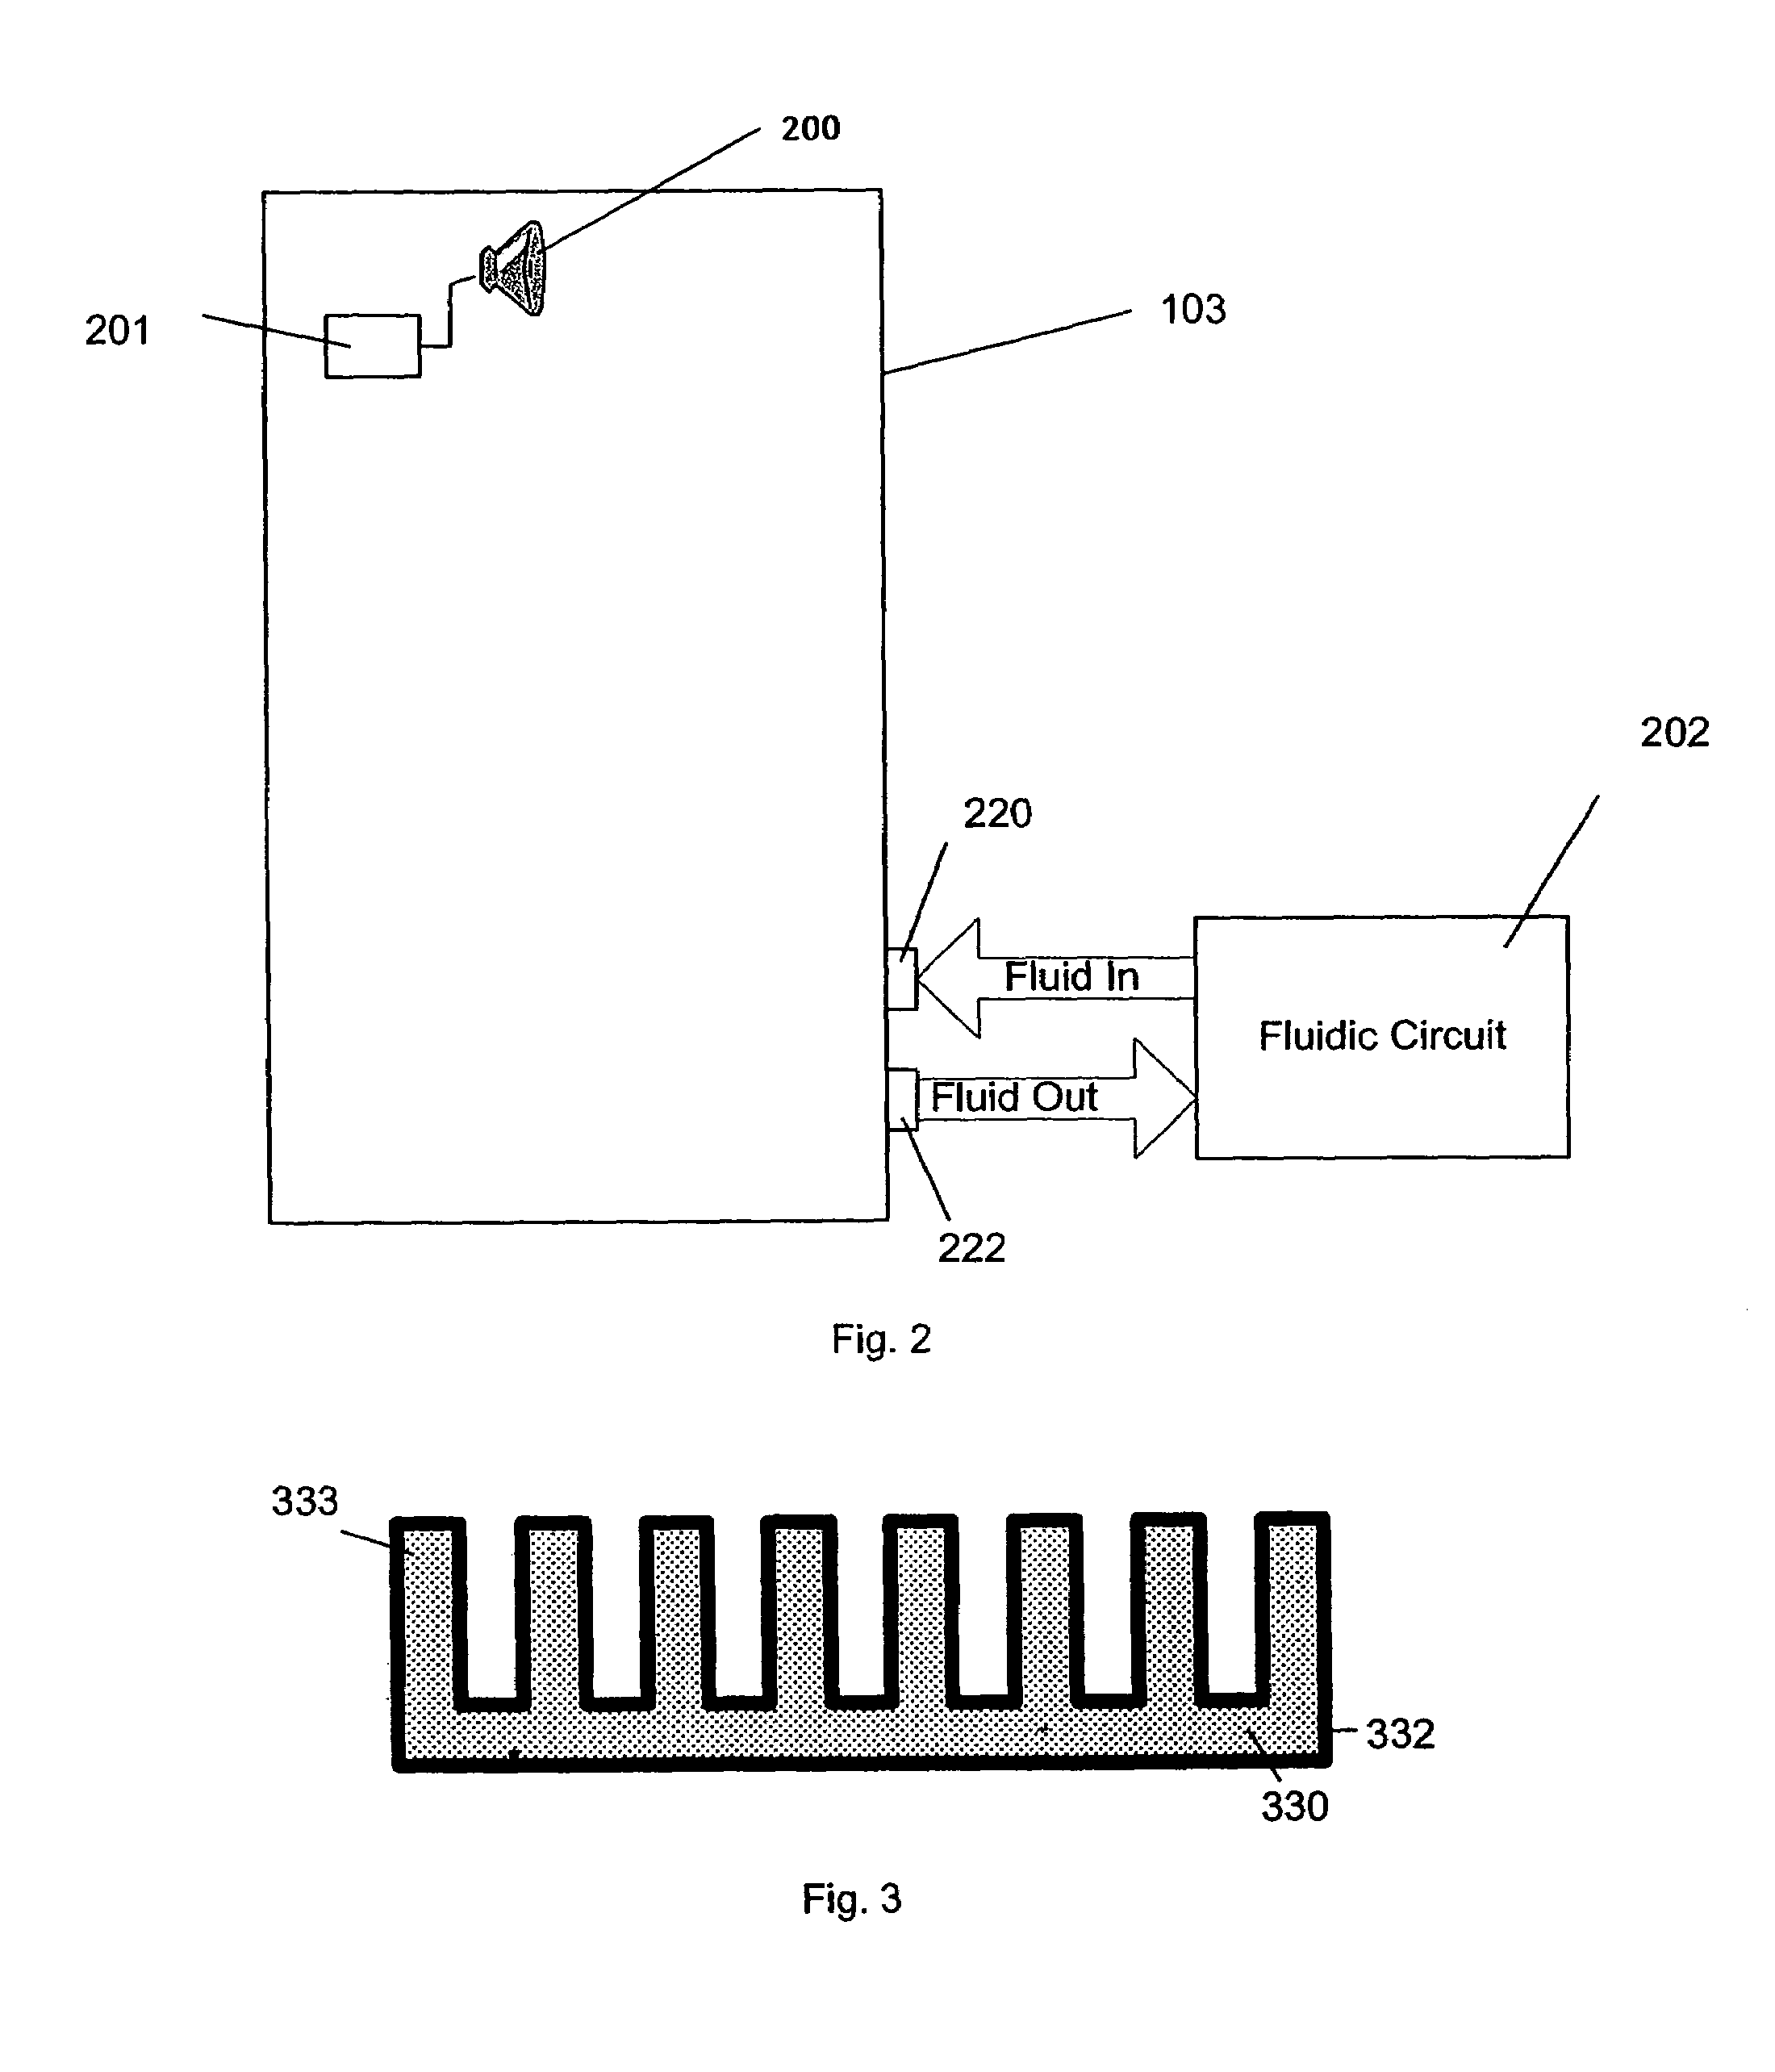 Cooling failure mitigation for an electronics enclosure